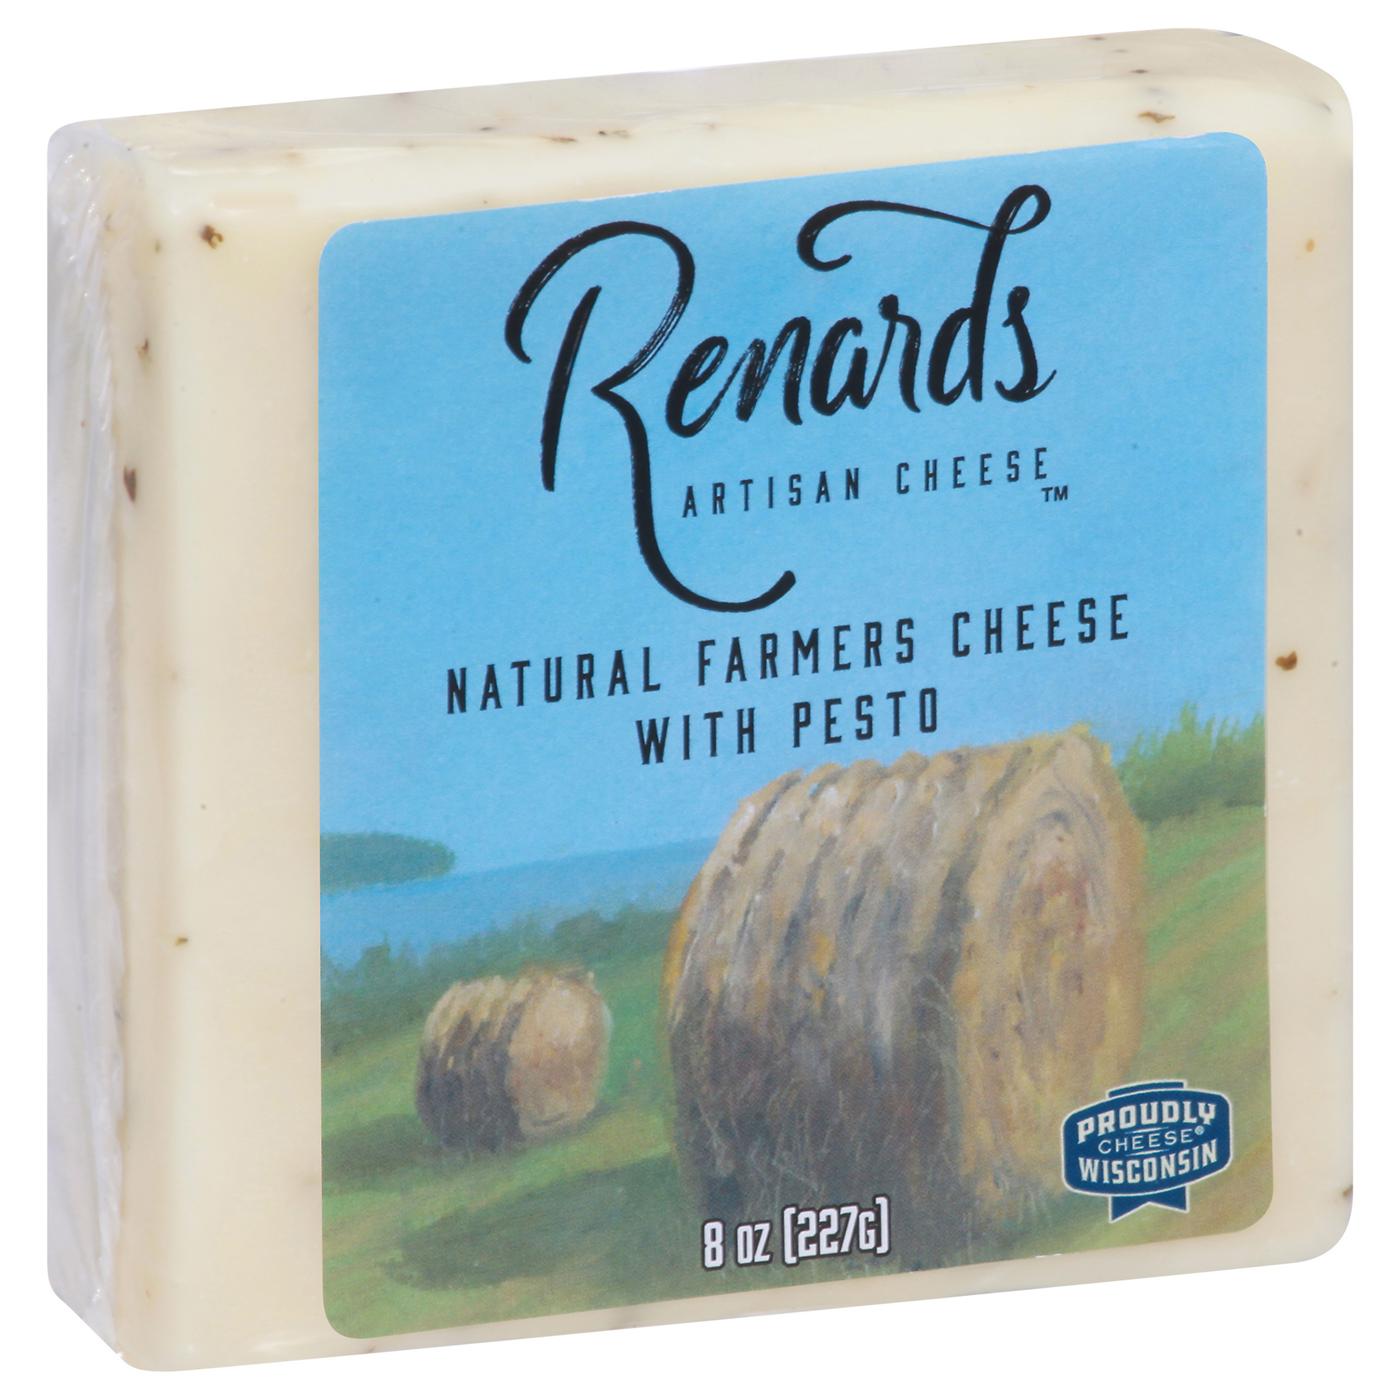 Renard's Artisan Cheese Natural Farmers Cheese with Pesto; image 2 of 3